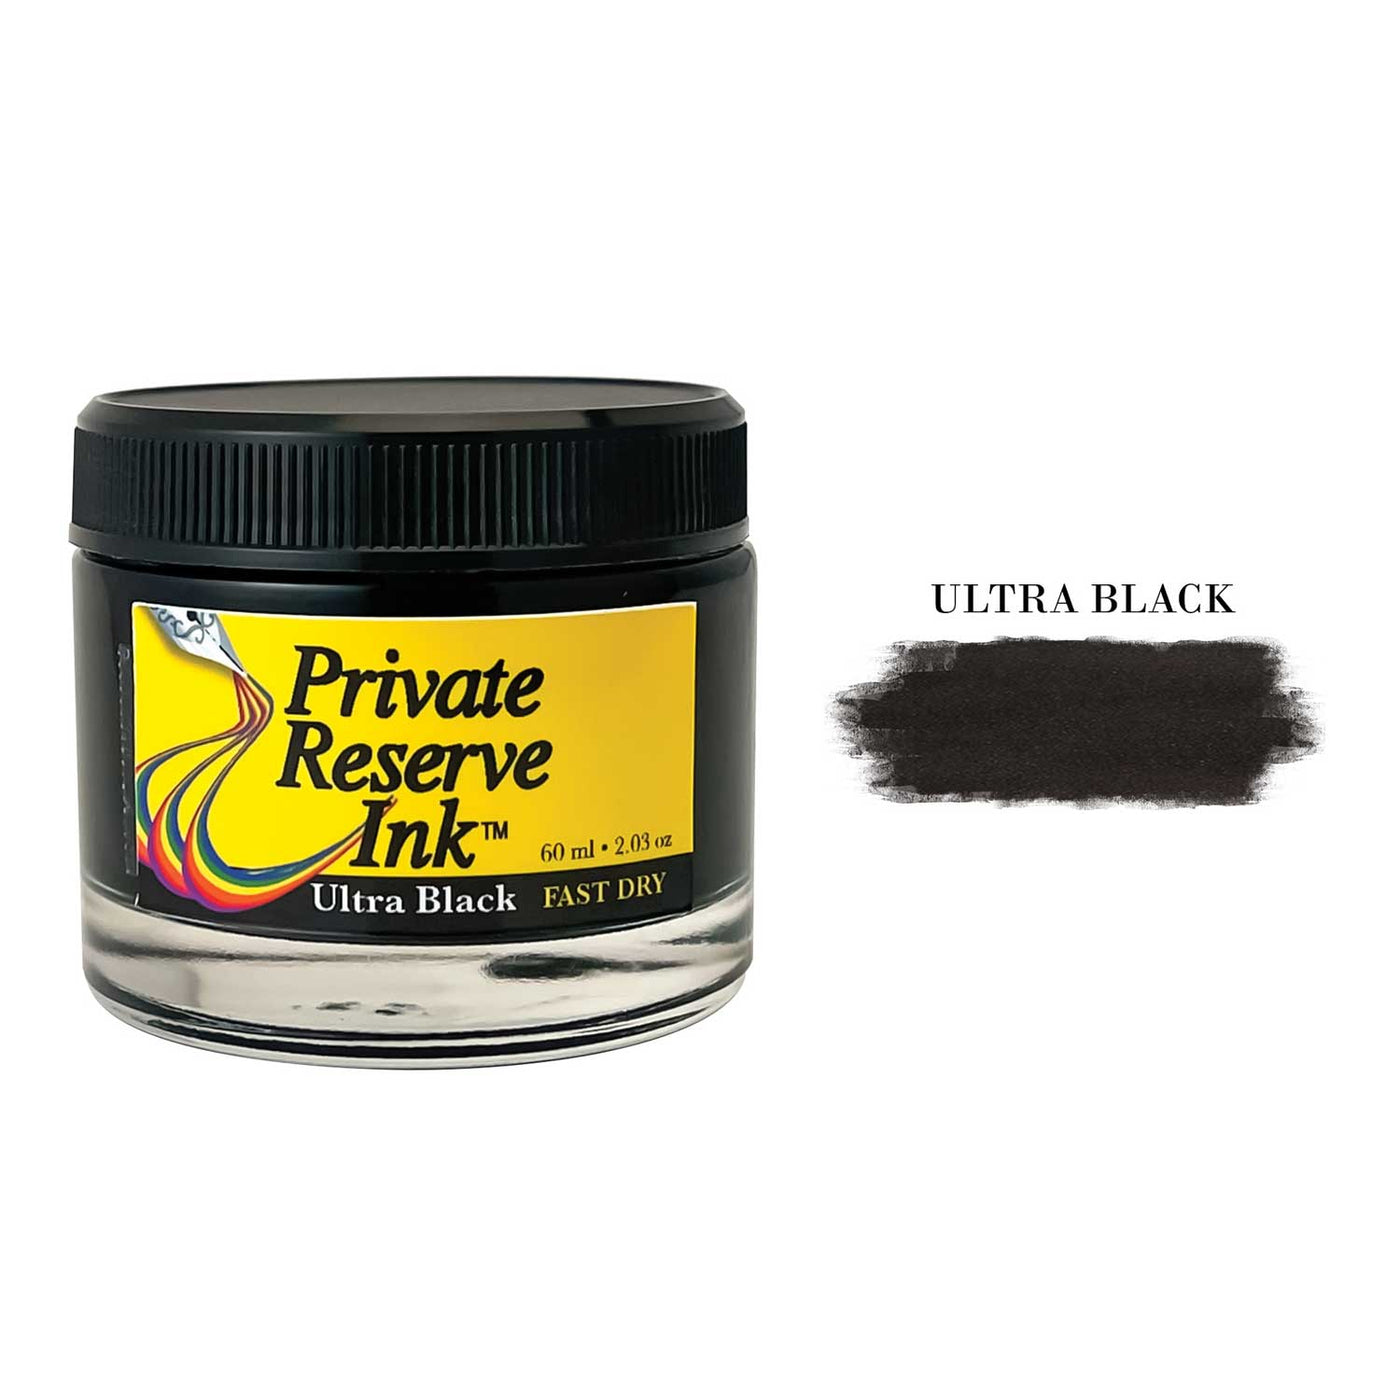 Private Reserve Ultra Black Fast Dry Ink Bottle - 60ml 1